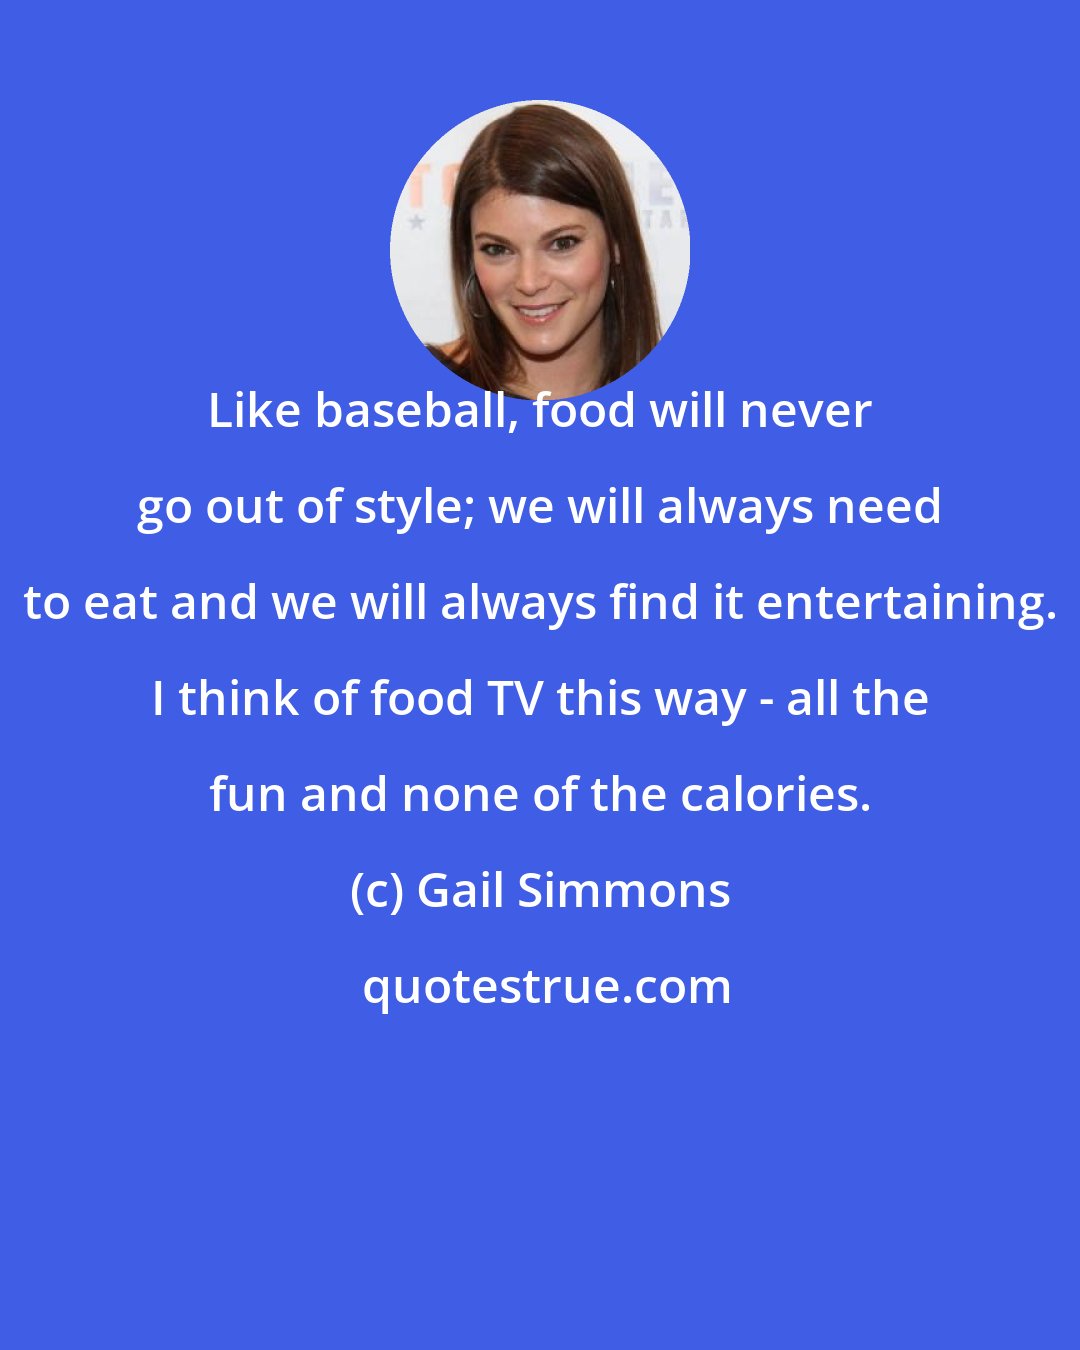 Gail Simmons: Like baseball, food will never go out of style; we will always need to eat and we will always find it entertaining. I think of food TV this way - all the fun and none of the calories.